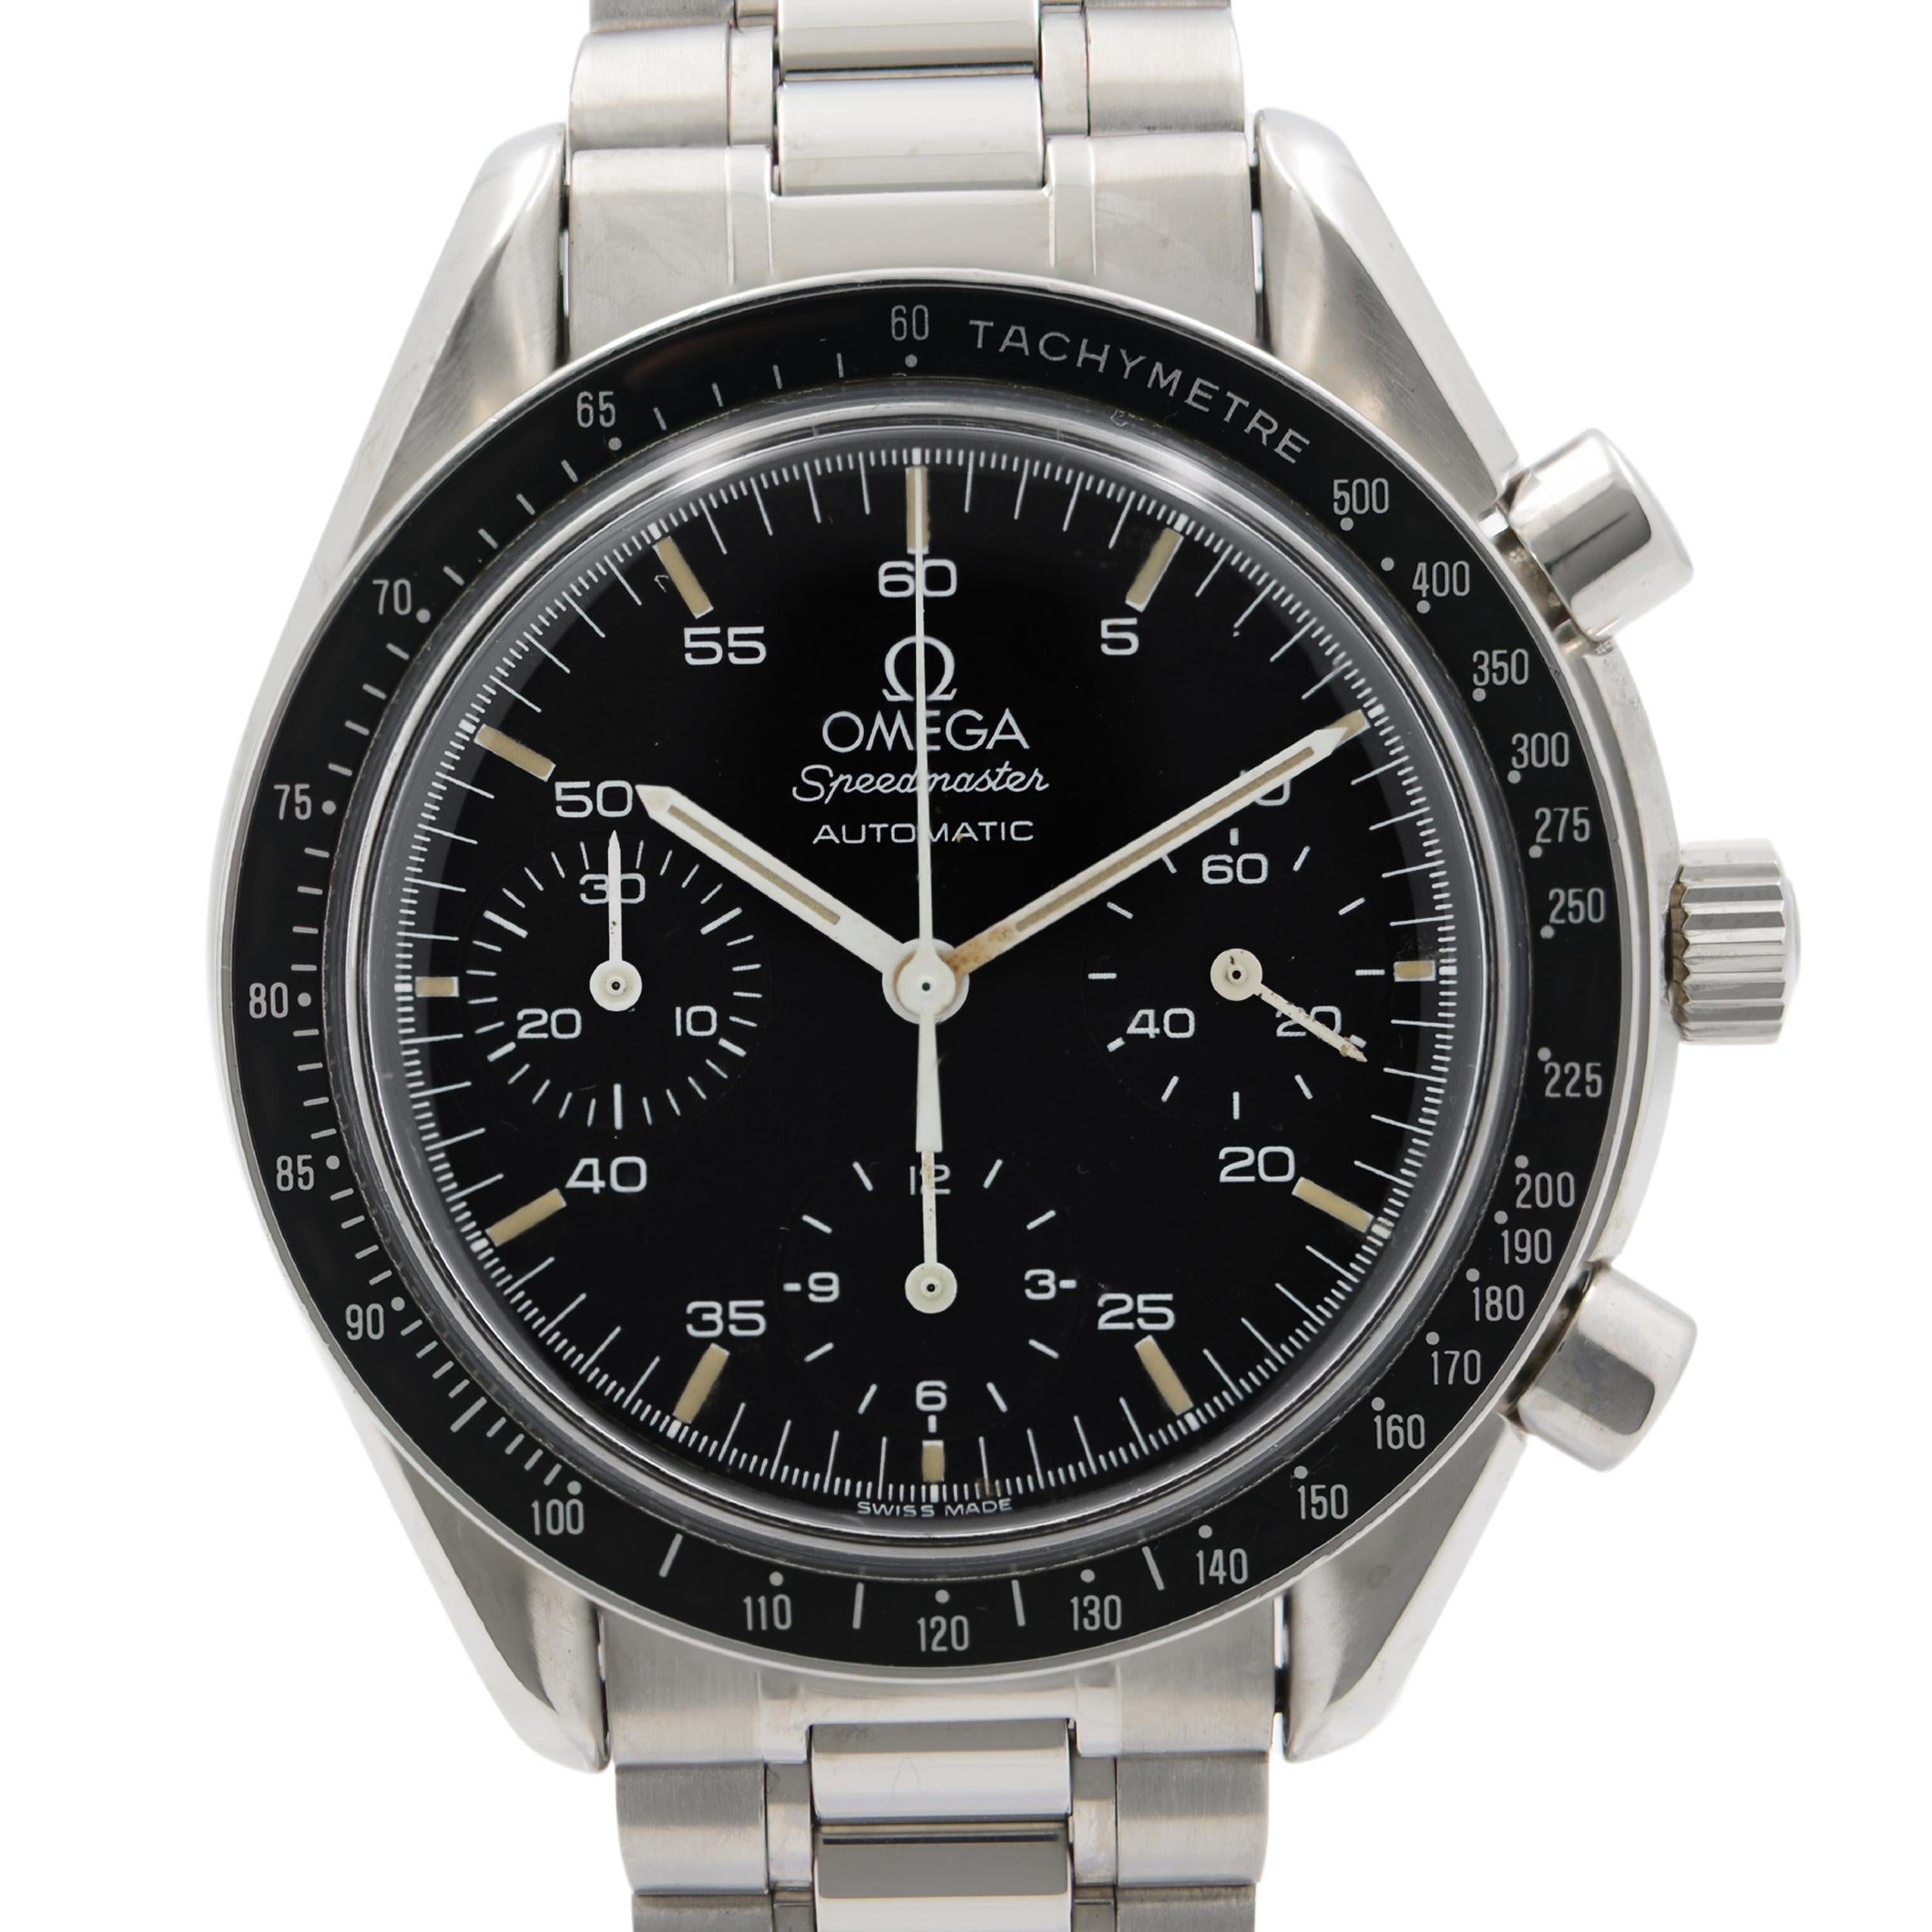 Pre Owned Omega Speedmaster Reduced 39mm Steel Black Dial Automatic Men's Watch 3510.50.00. This Beautiful Timepiece Features: Stainless Steel Case & Bracelet Fixed Stainless Steel Bezel with Black Tachymeter Scale Top Ring, Black Dial with Luminous